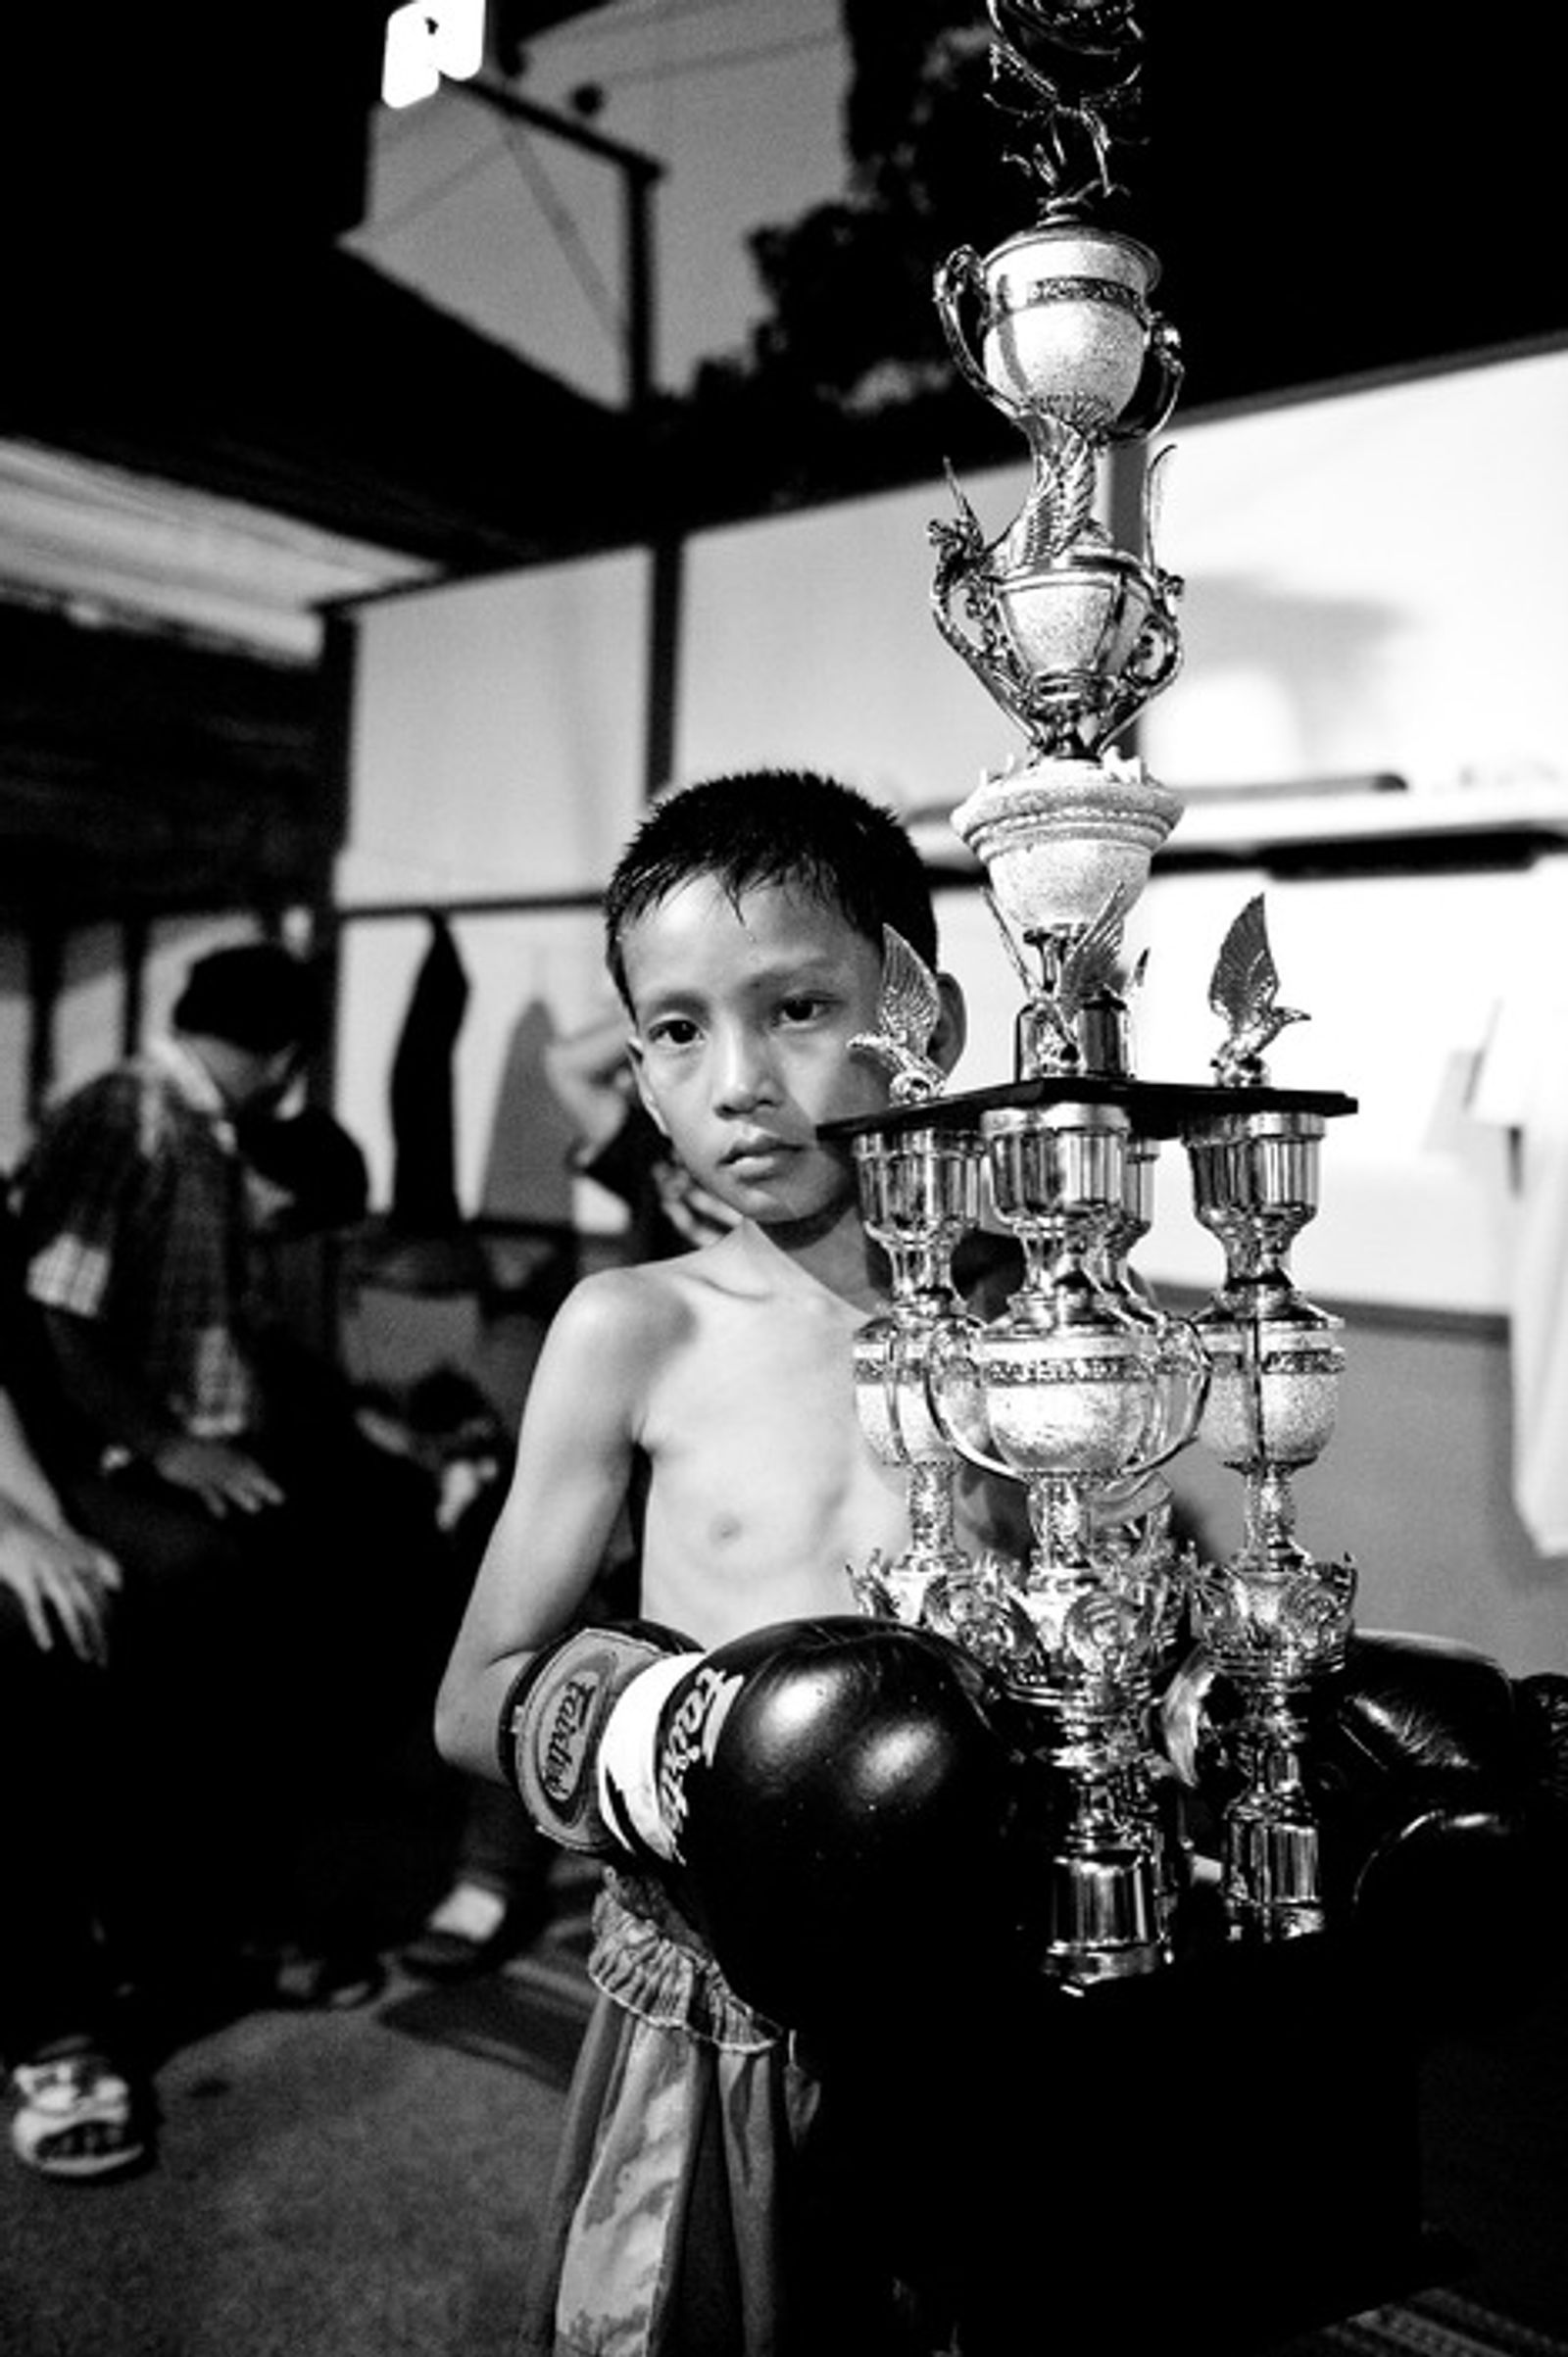 © Sandra Hoyn - Image from the Fighting Kids photography project